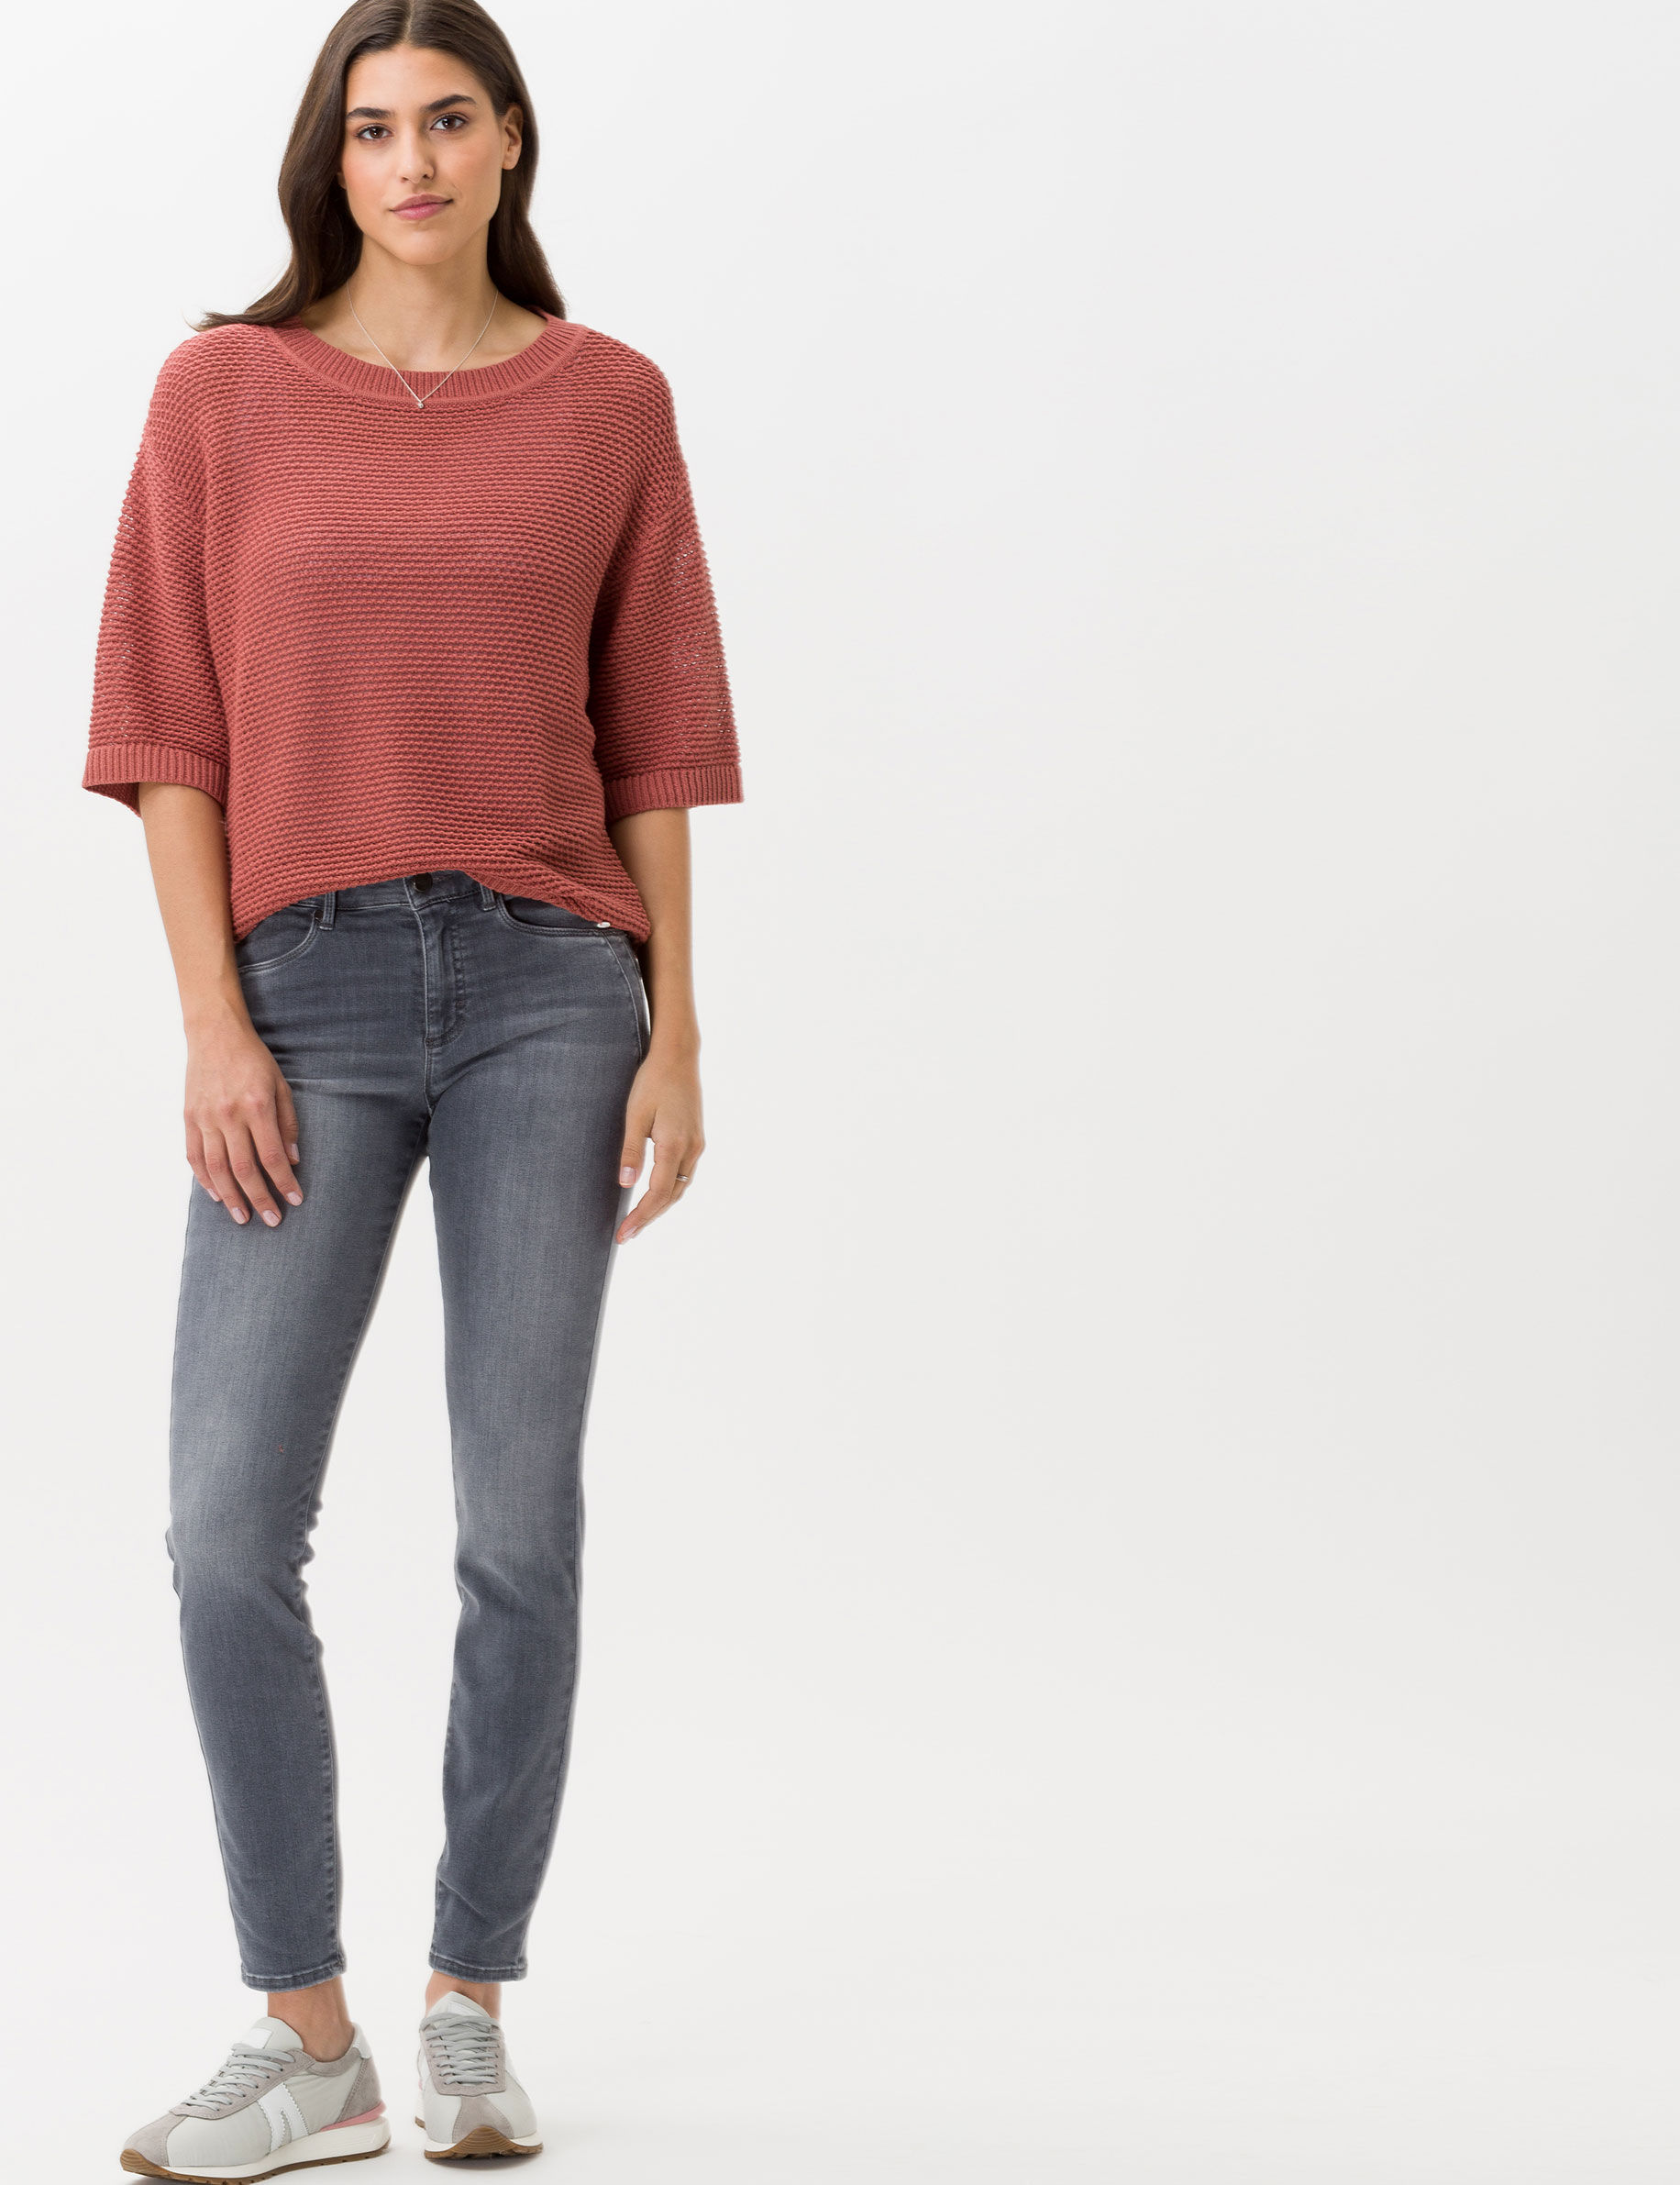 Women Style ANA USED GREY Skinny Fit Model Outfit